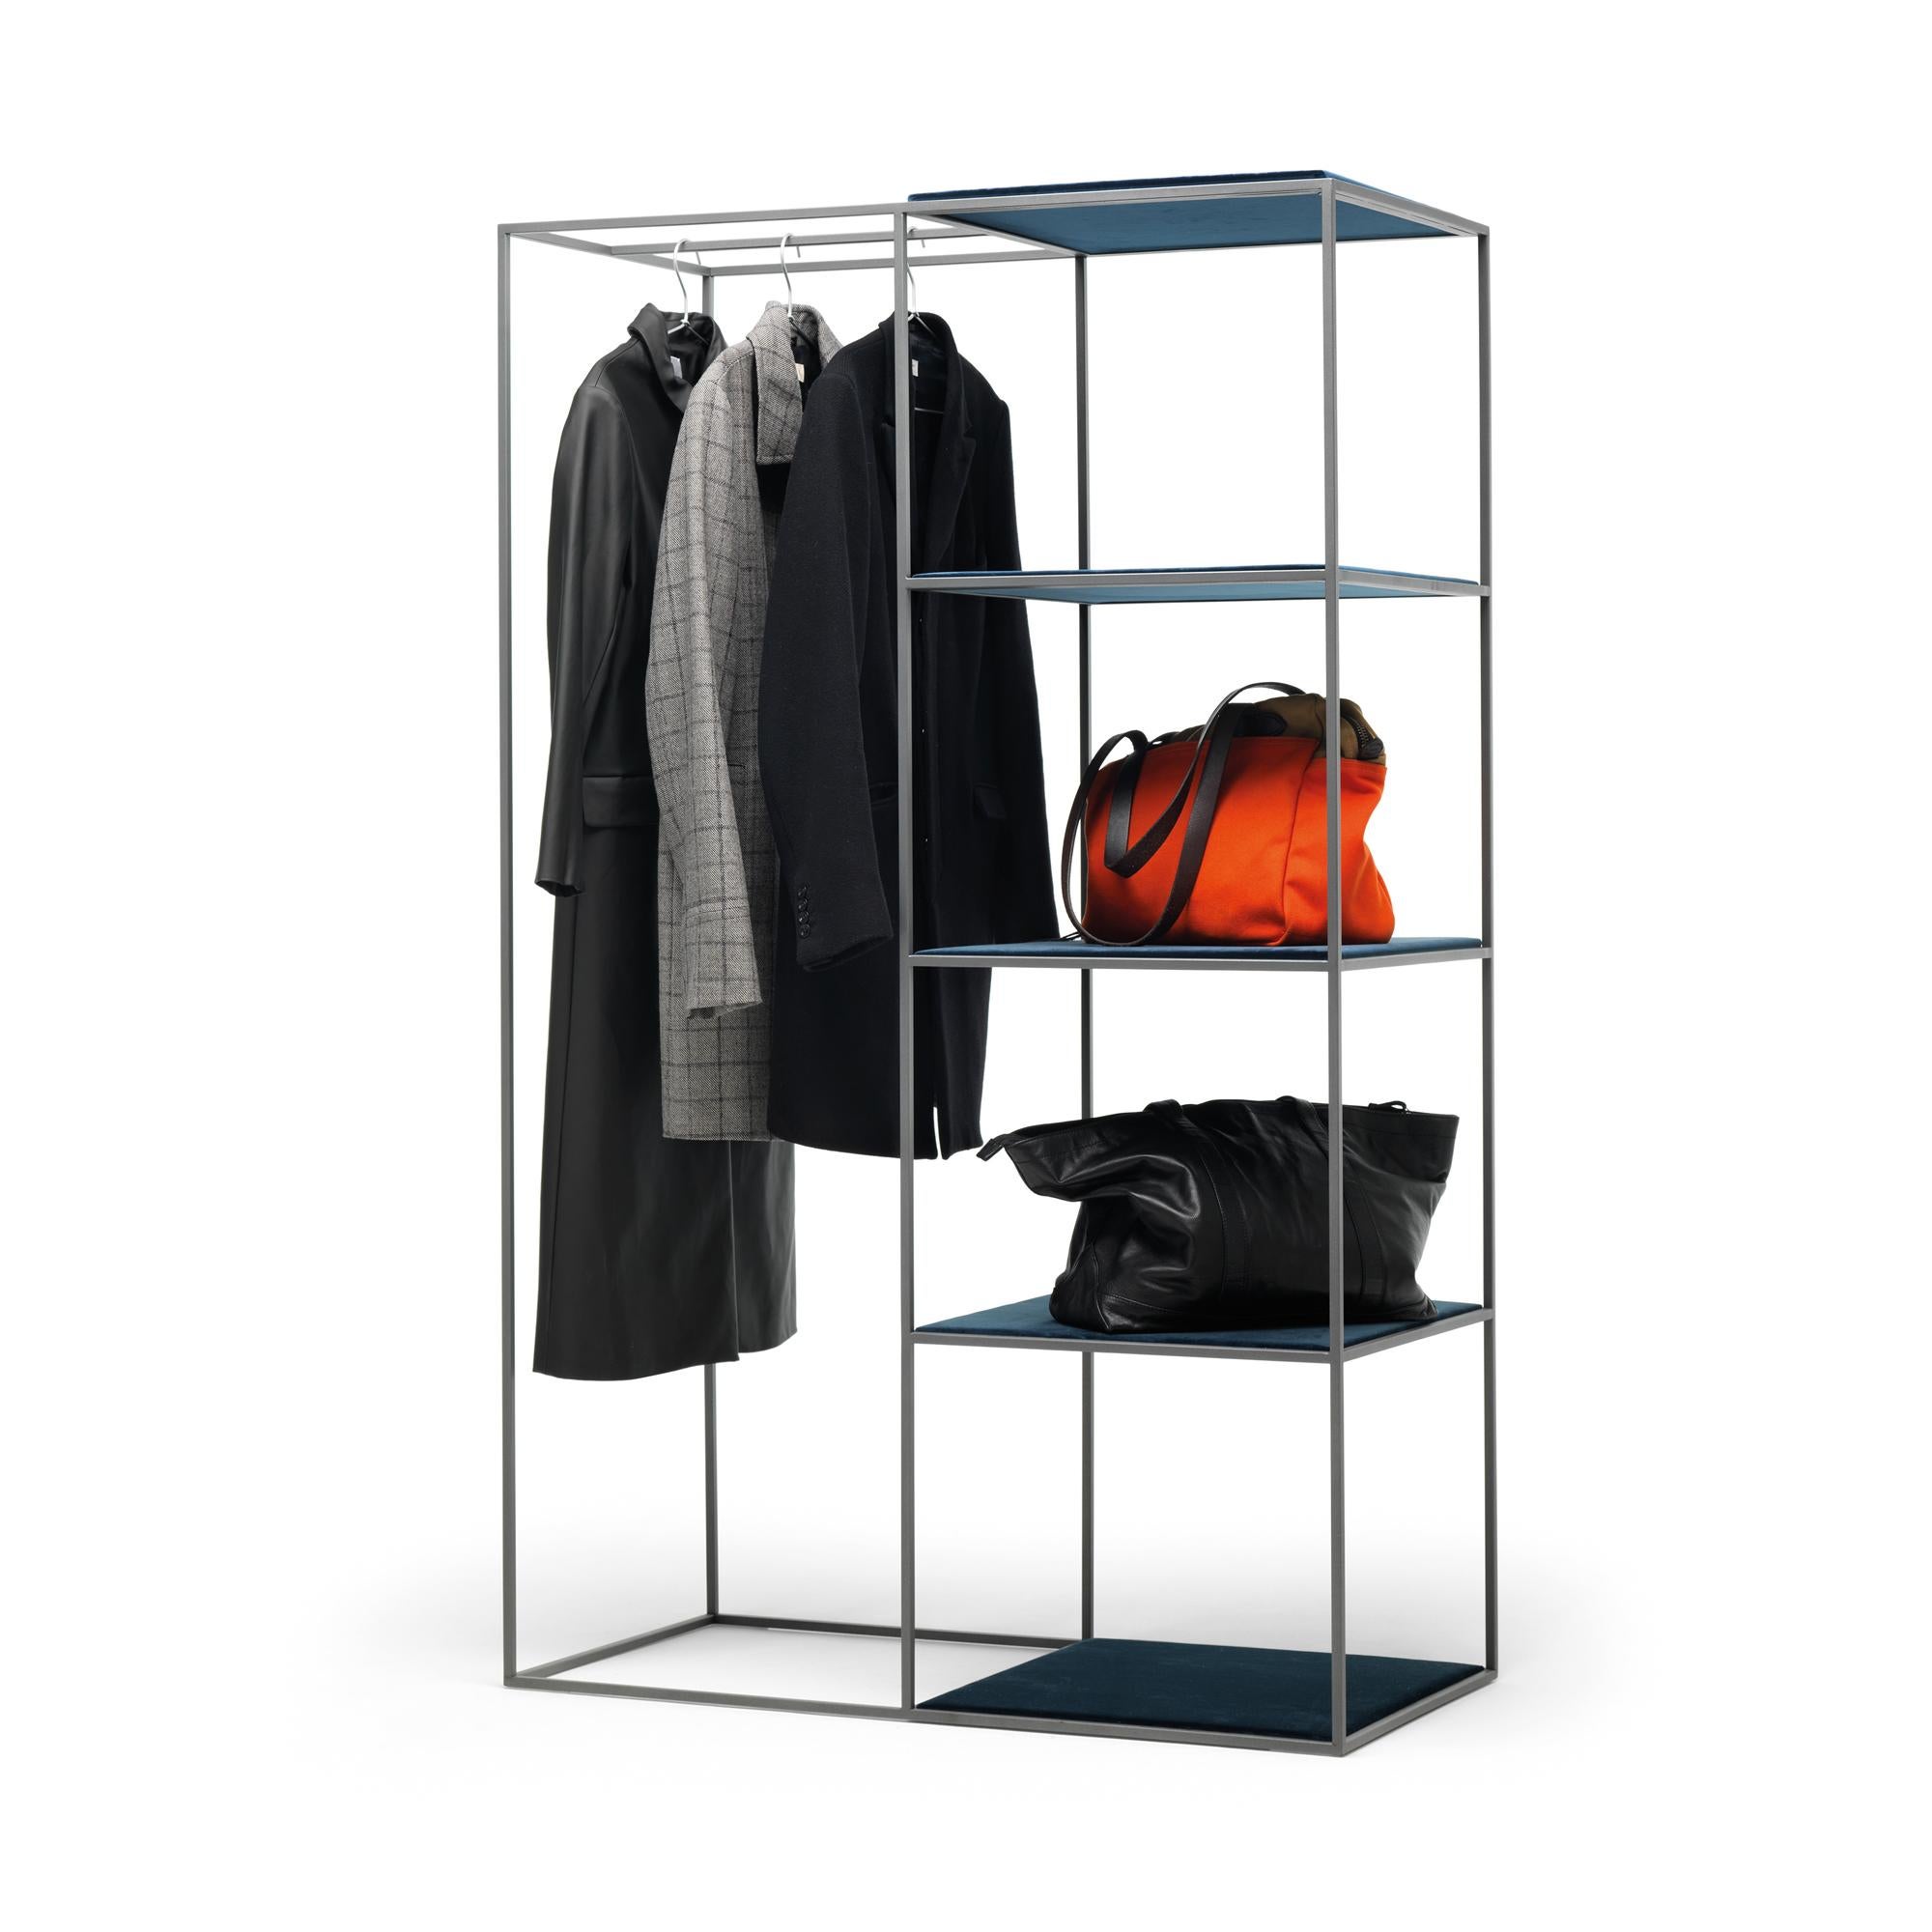 The Gotham wardrobe merges the functions of a coat hanger and those of a set of shelves. It can be used in the home or in a commercial space to display hanging as well as folded garments. The structure is physically and visually extremely light; it